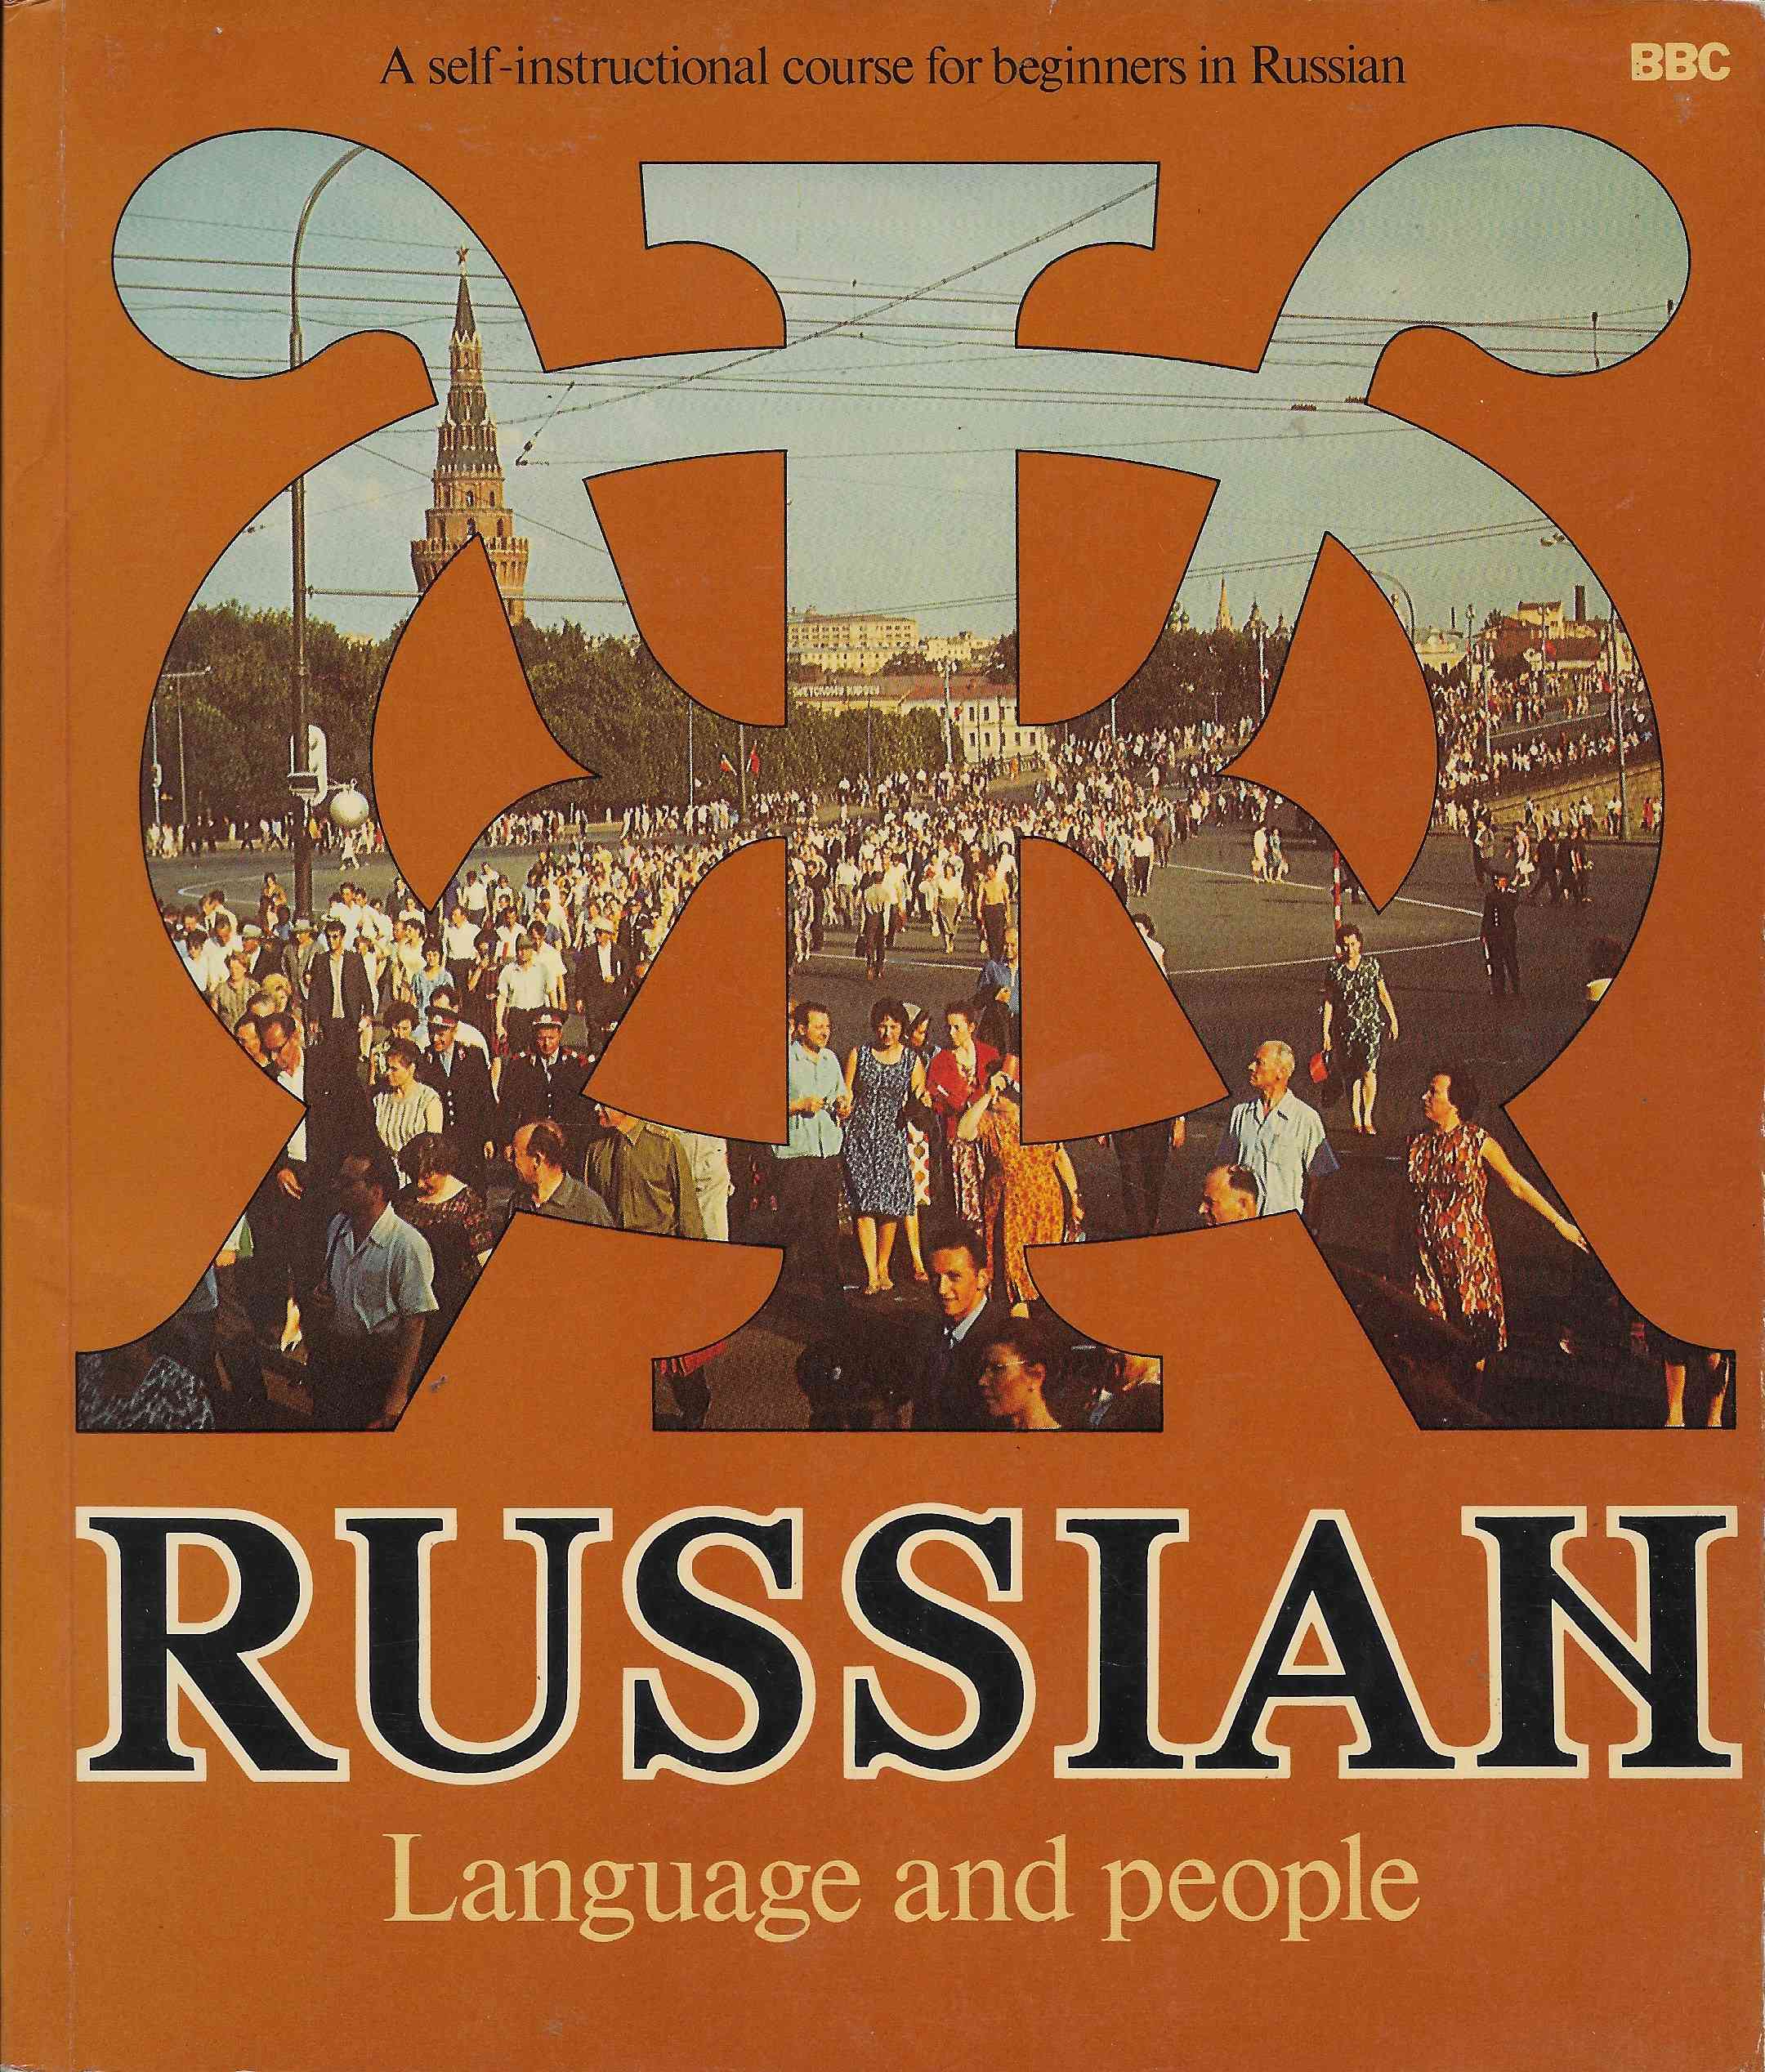 Picture of ISBN 0 563 16303 8 Russian language and people by artist Terry Culhane from the BBC books - Records and Tapes library